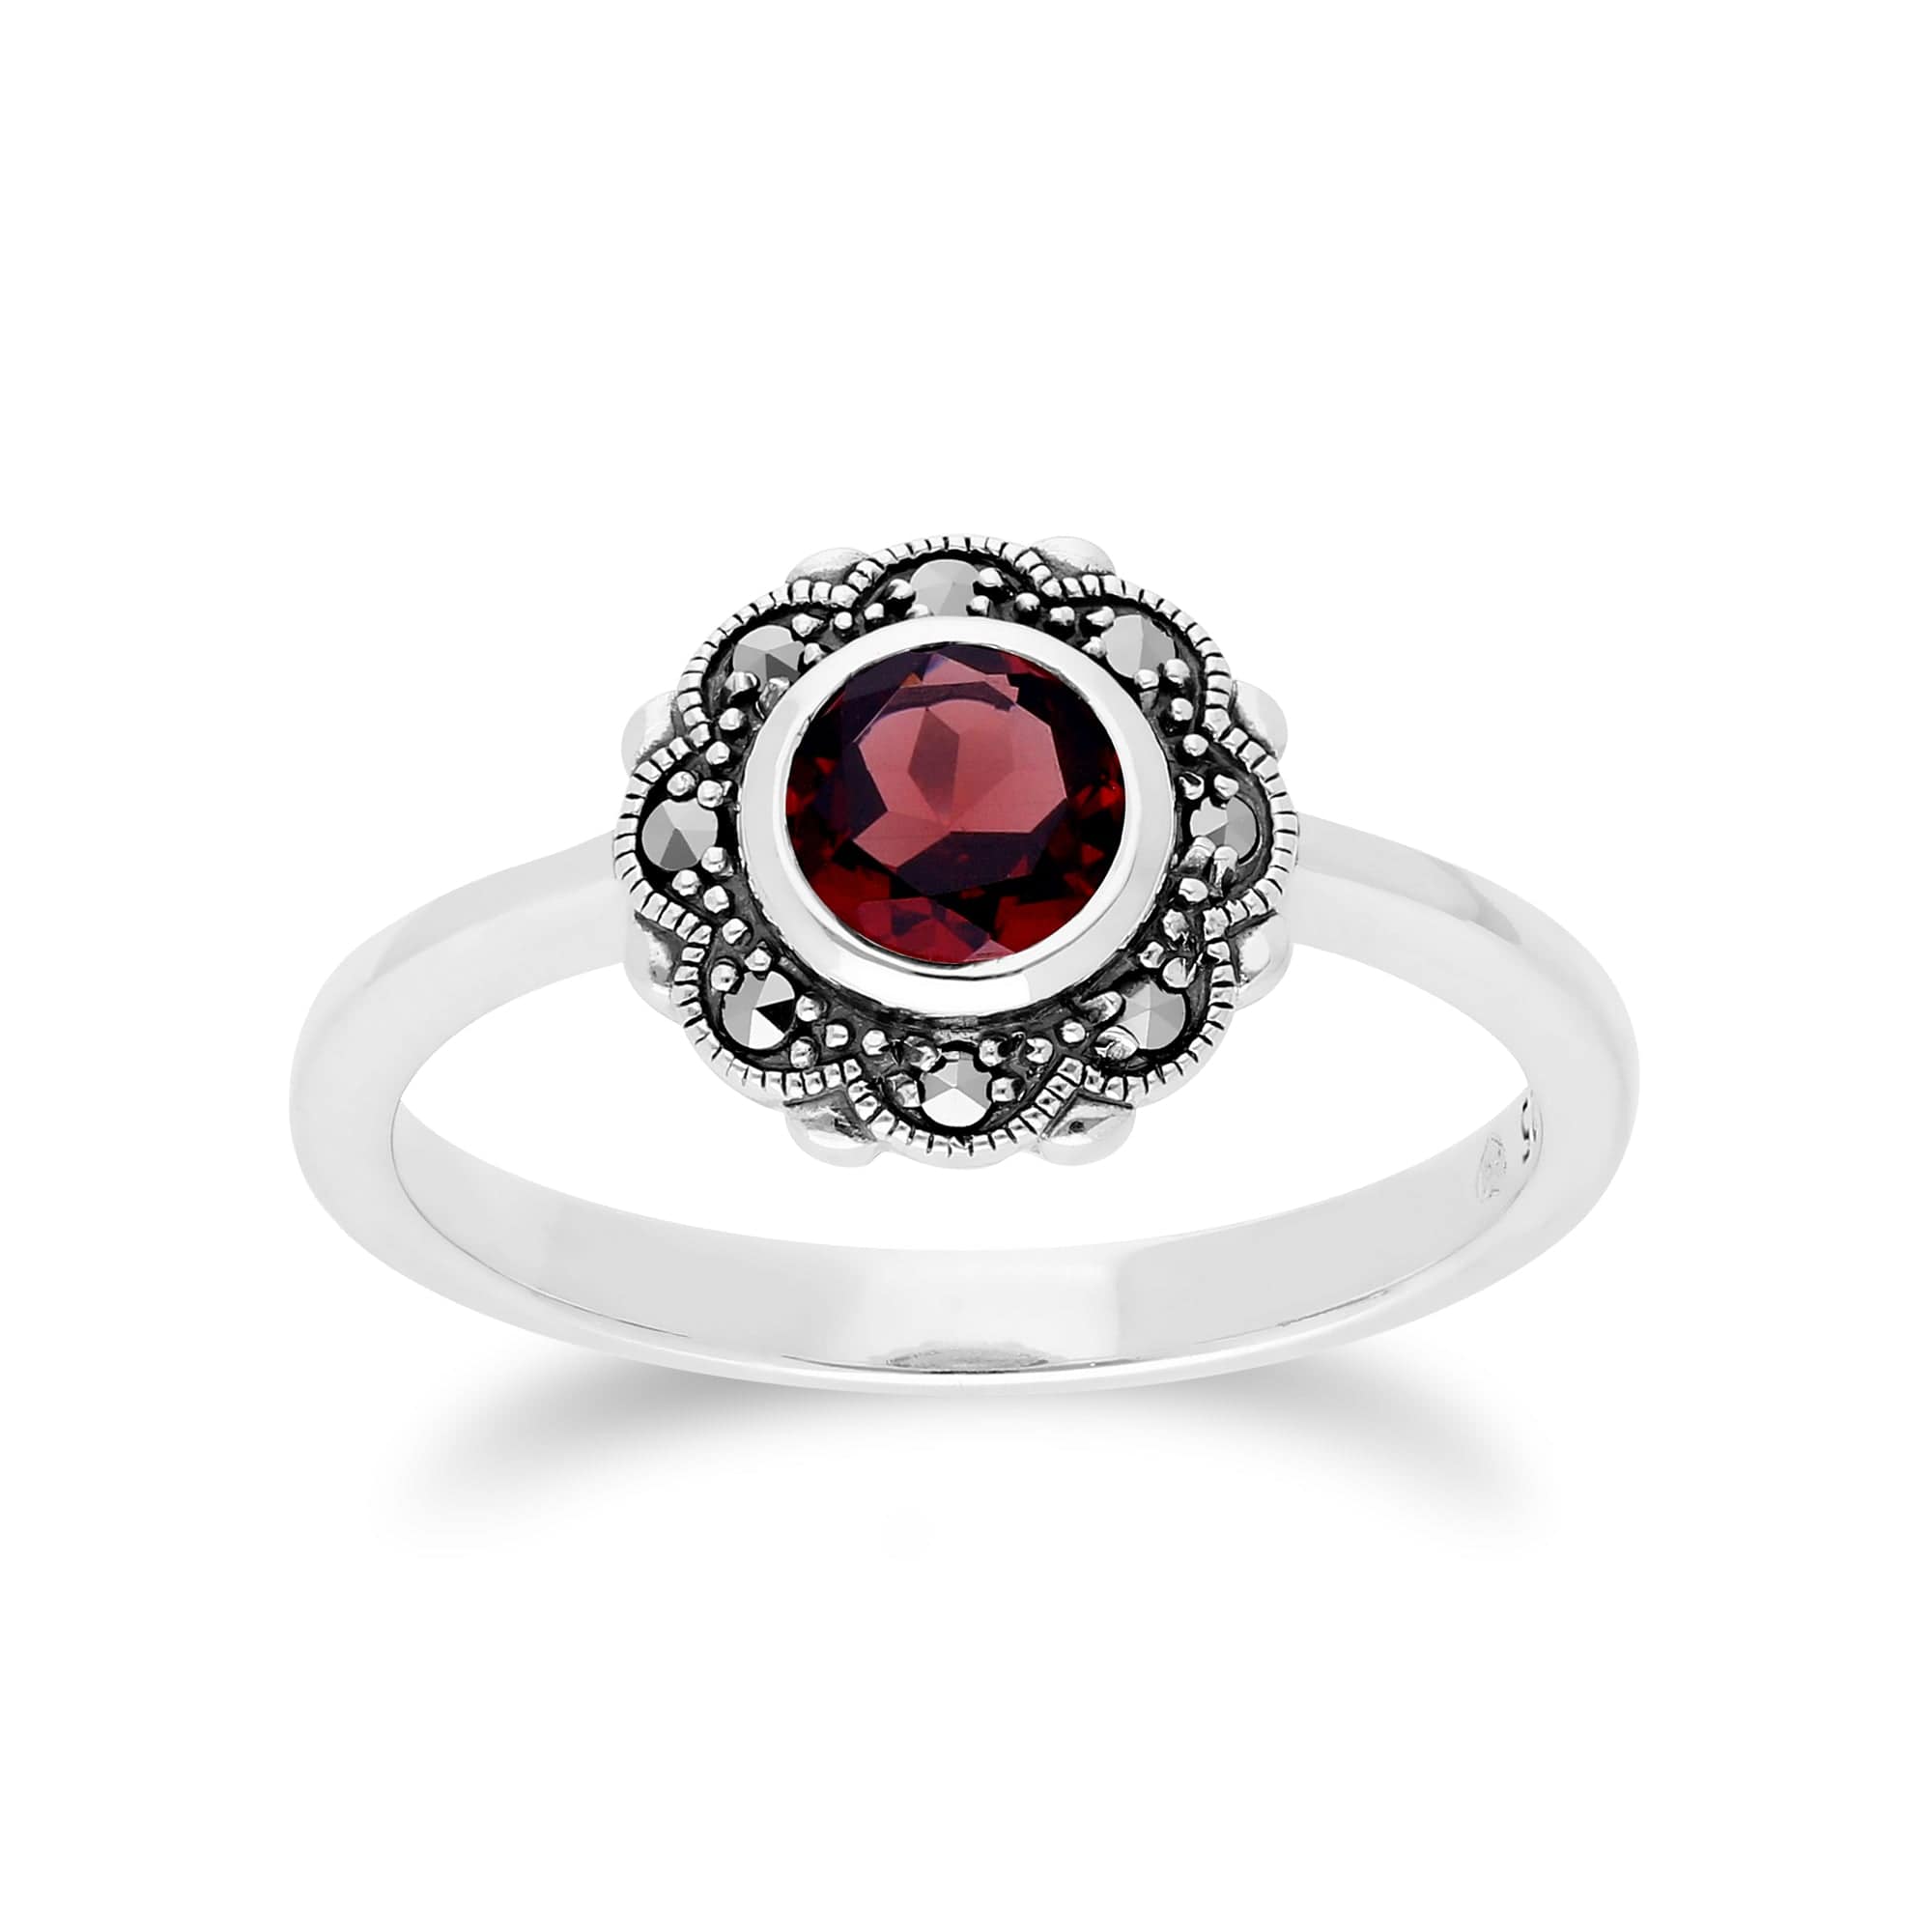 214R597001925 Floral Round Garnet & Marcasite Halo Ring in 925 Sterling Silver 1